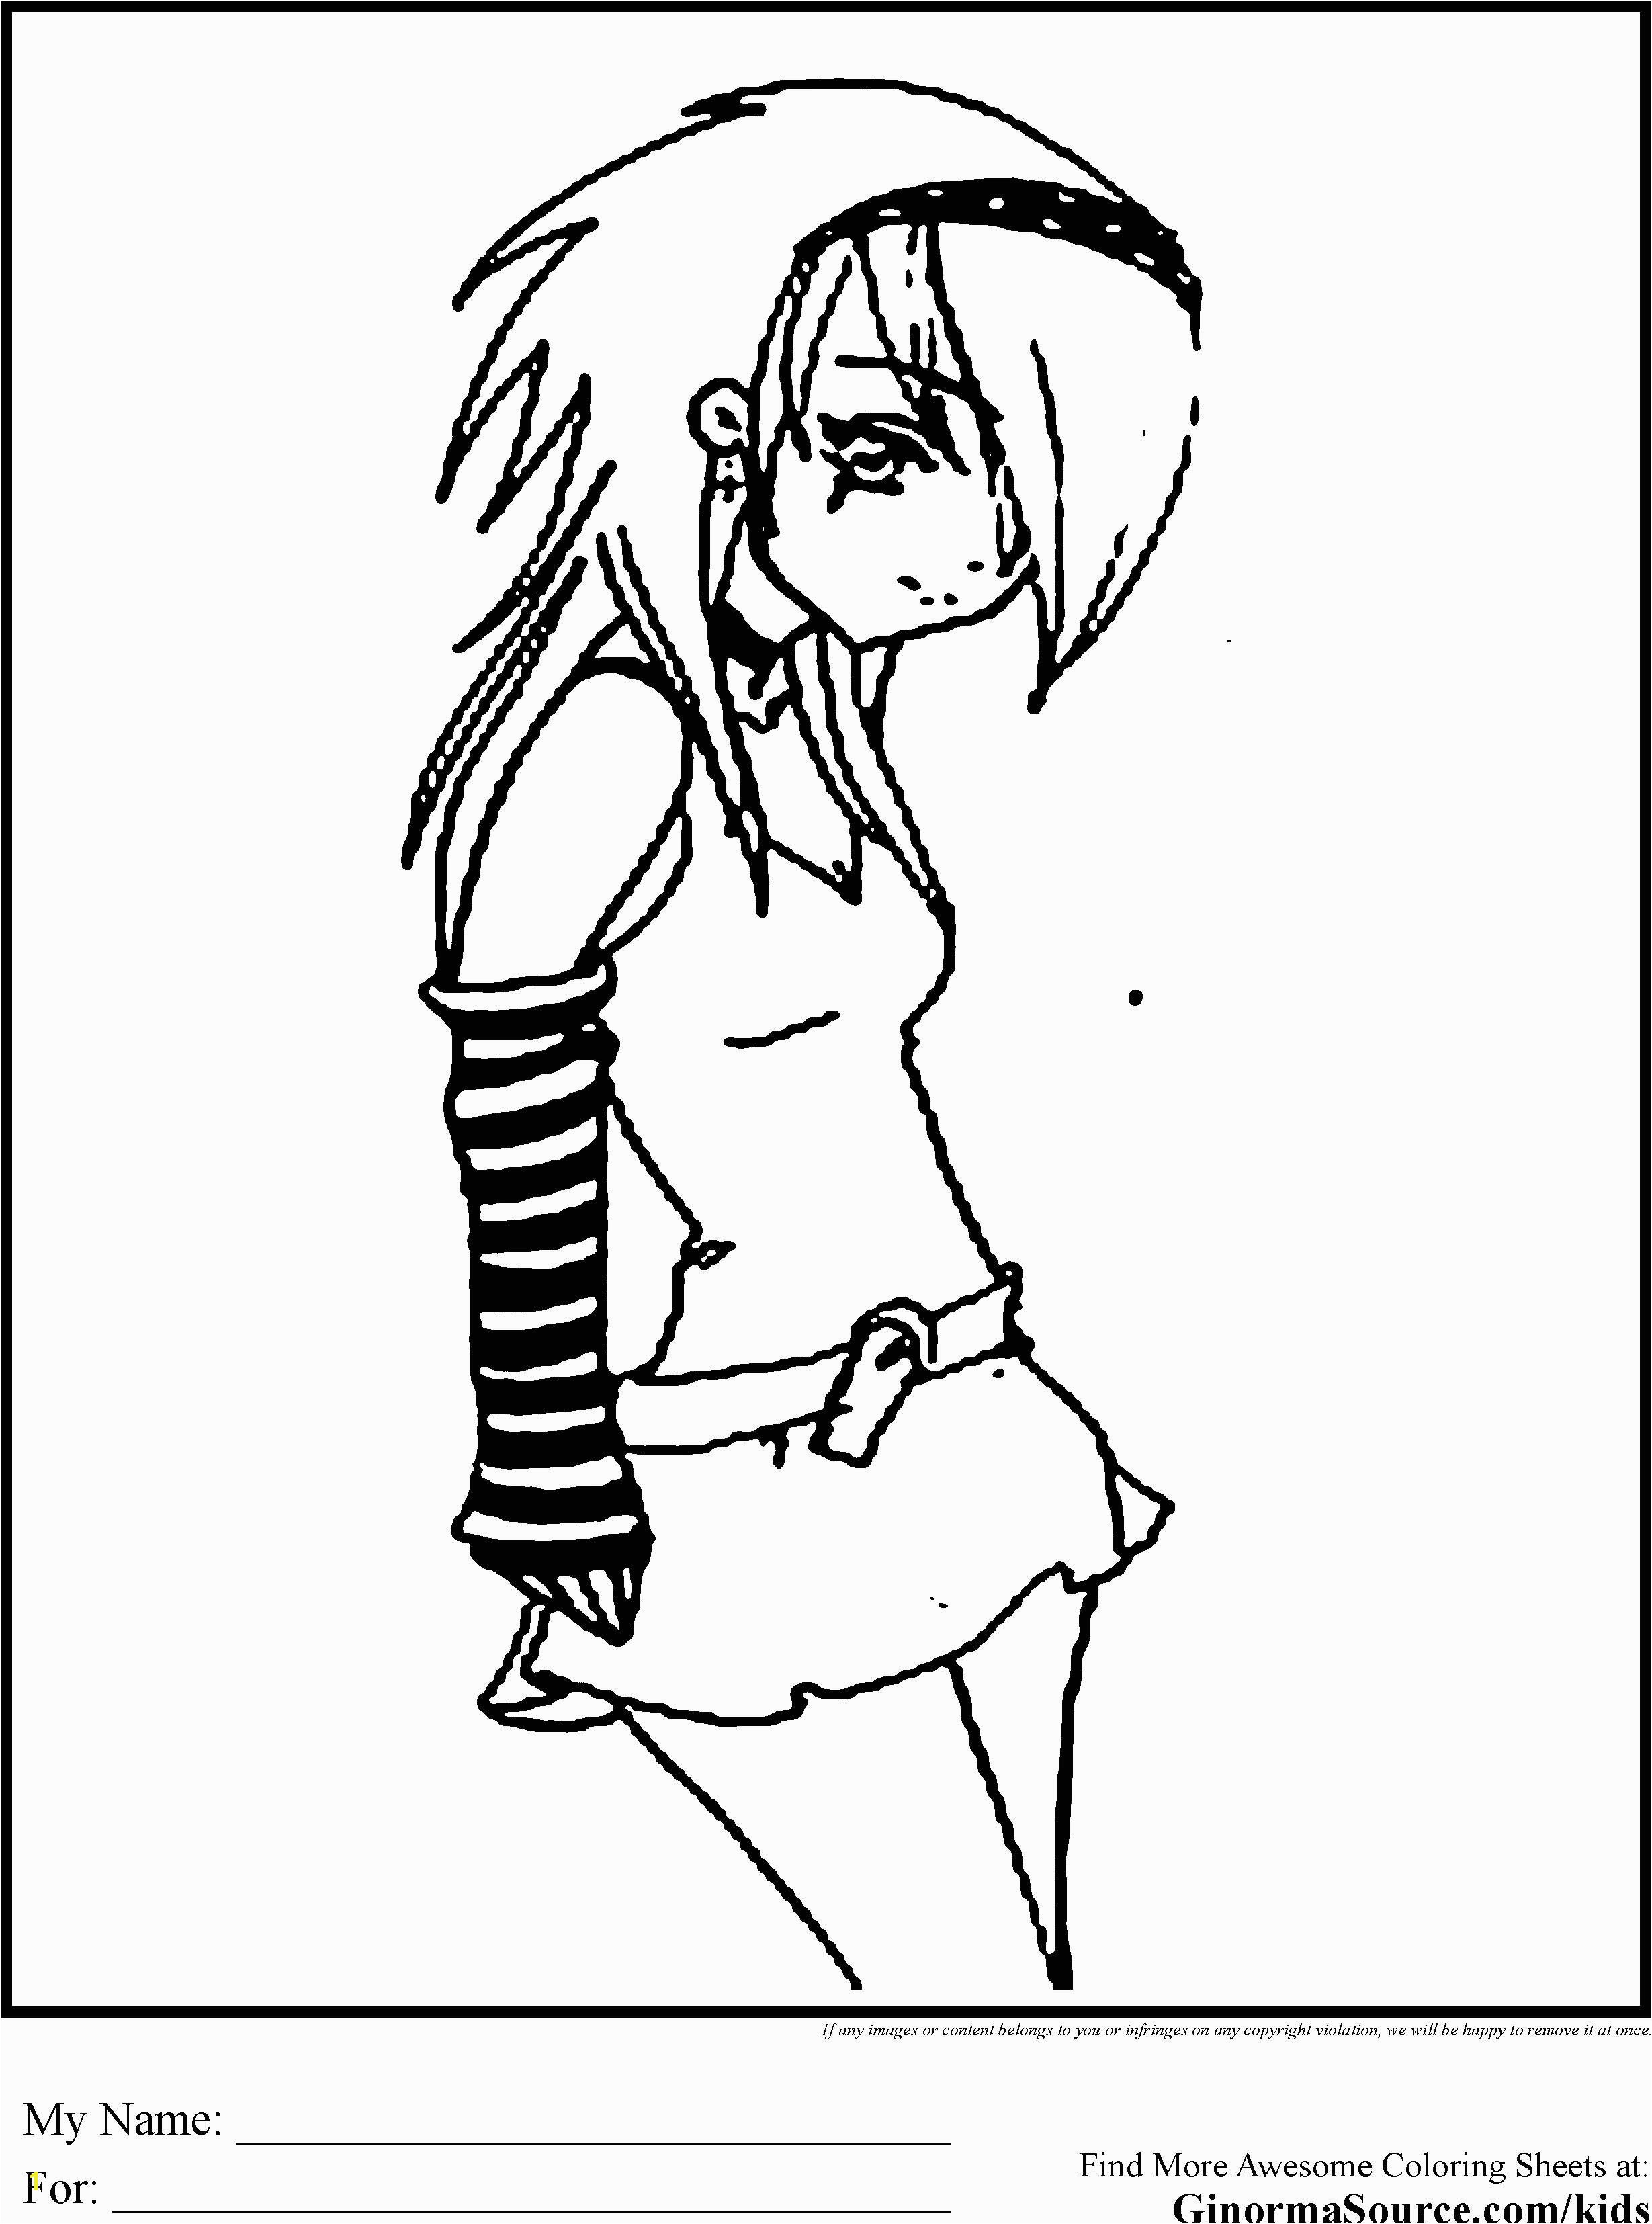 Emo Anime Coloring Pages to Print Anime Boy and Girl Coloring Pages Download